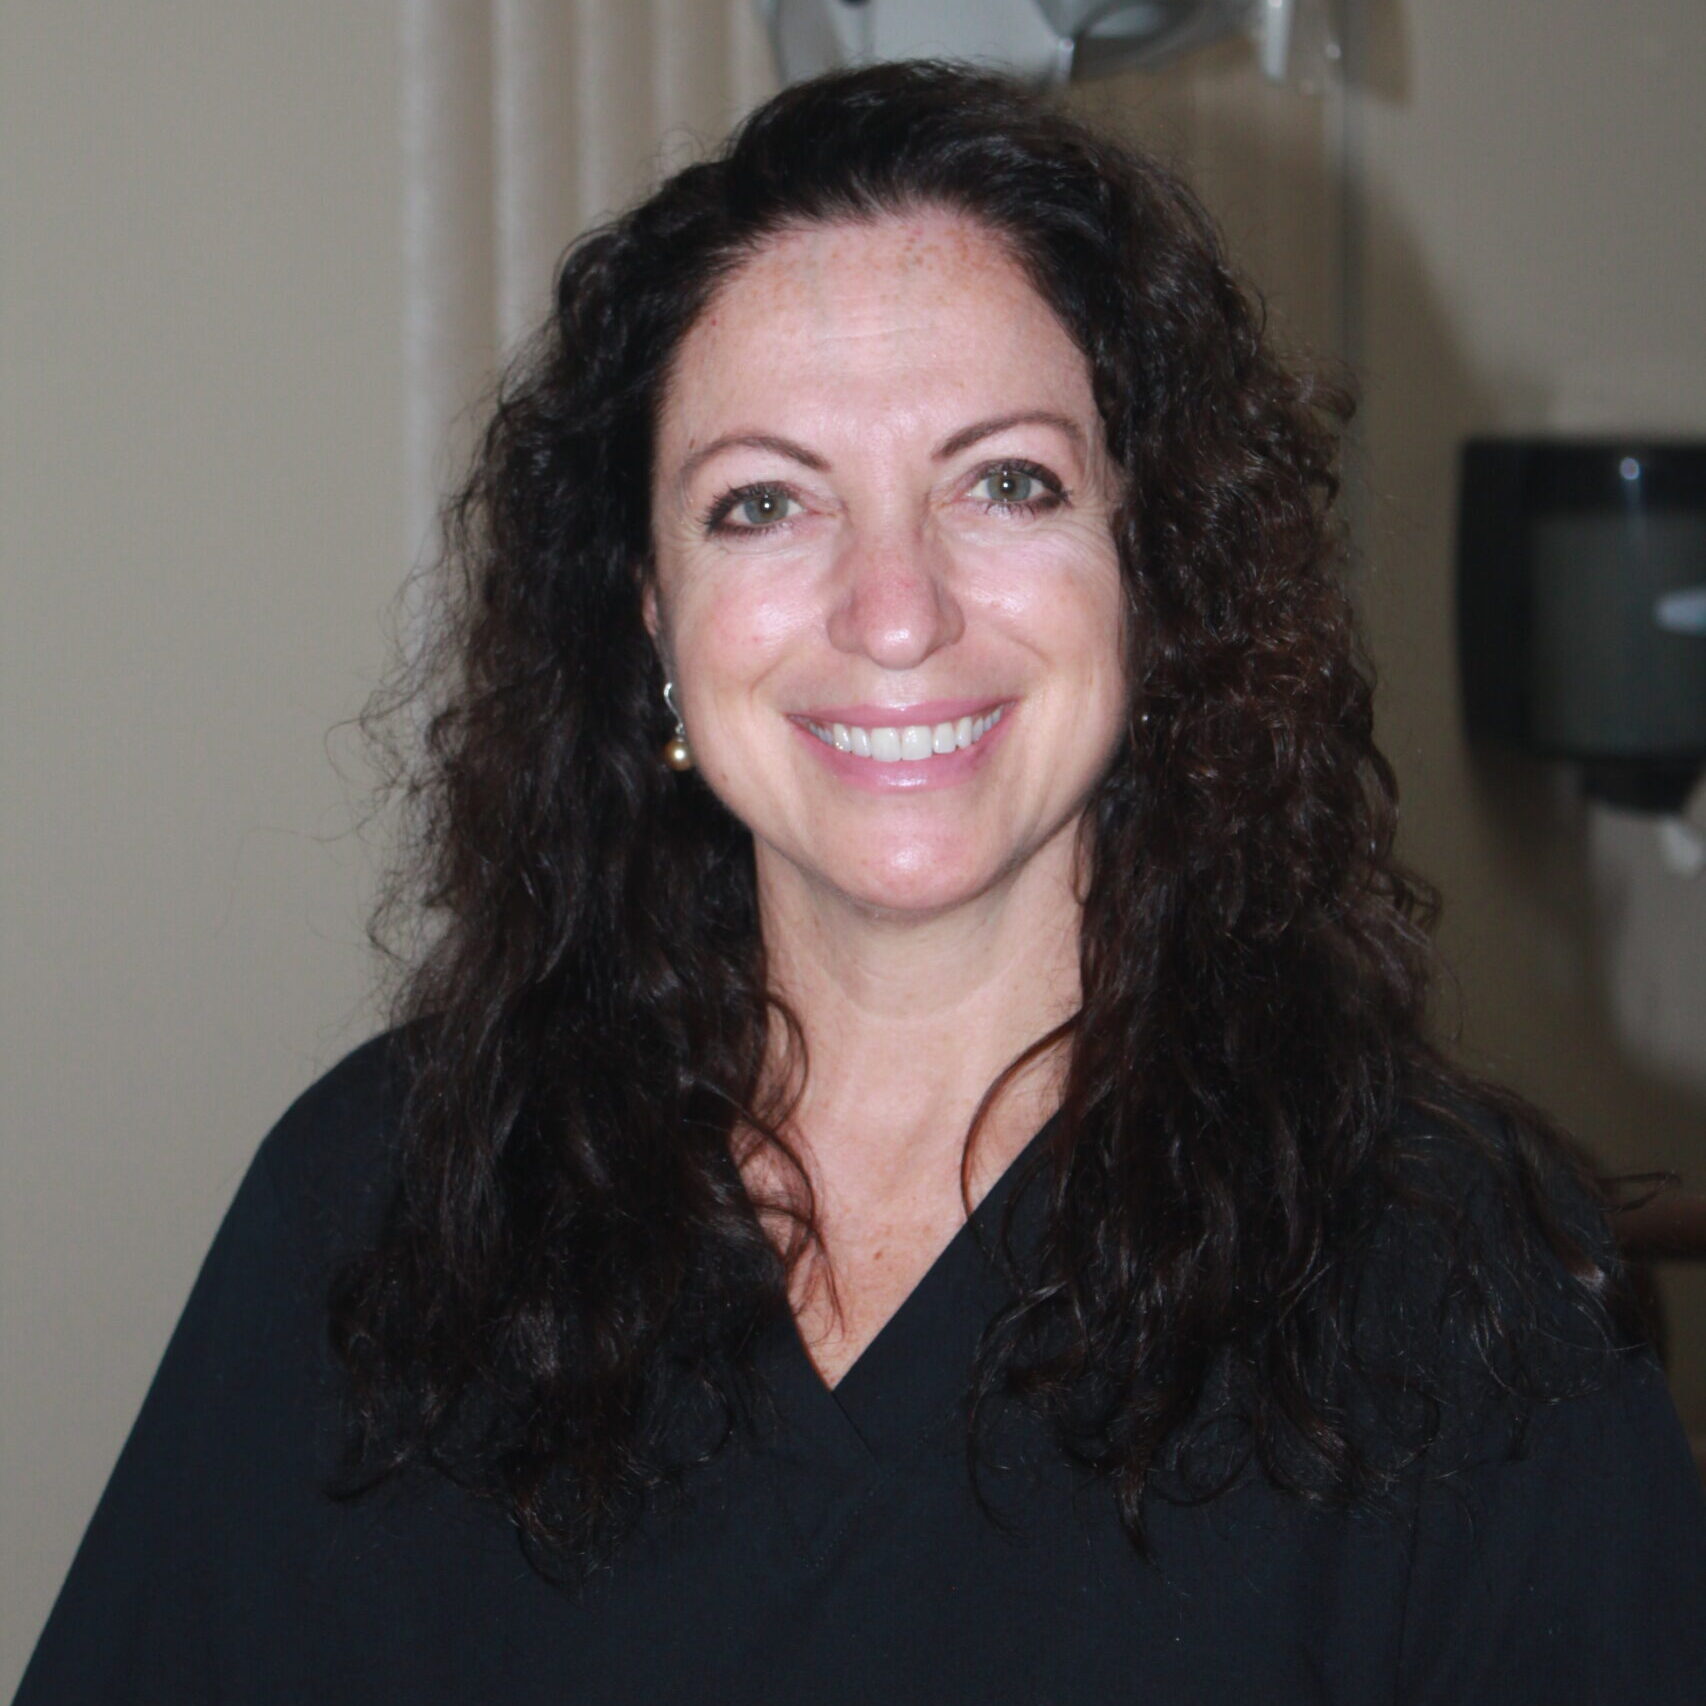 Assistant-Lily-2023-scaled-e1699346547293 Dental Assistant | Welland Dentistry